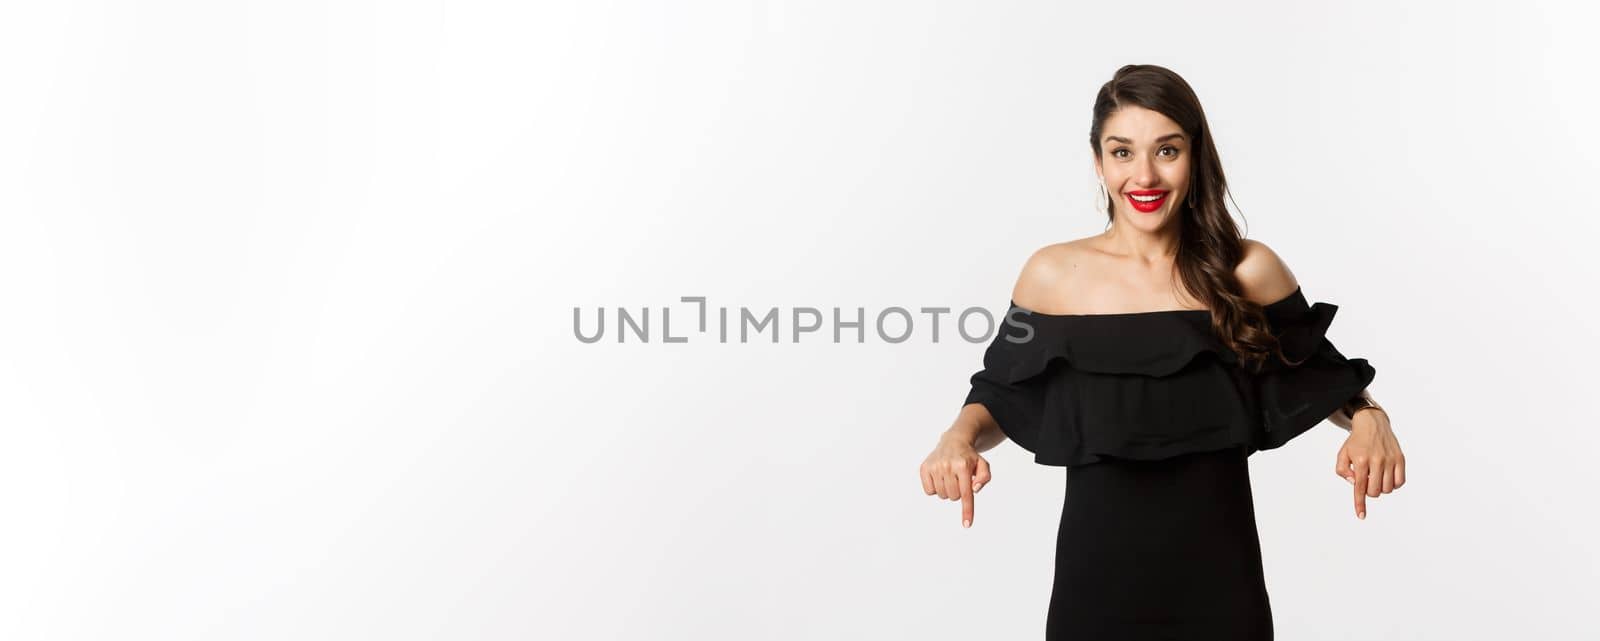 Fashion and beauty. Elegant woman in black dress pointing fingers down, showing promo and smiling, standing over white background by Benzoix